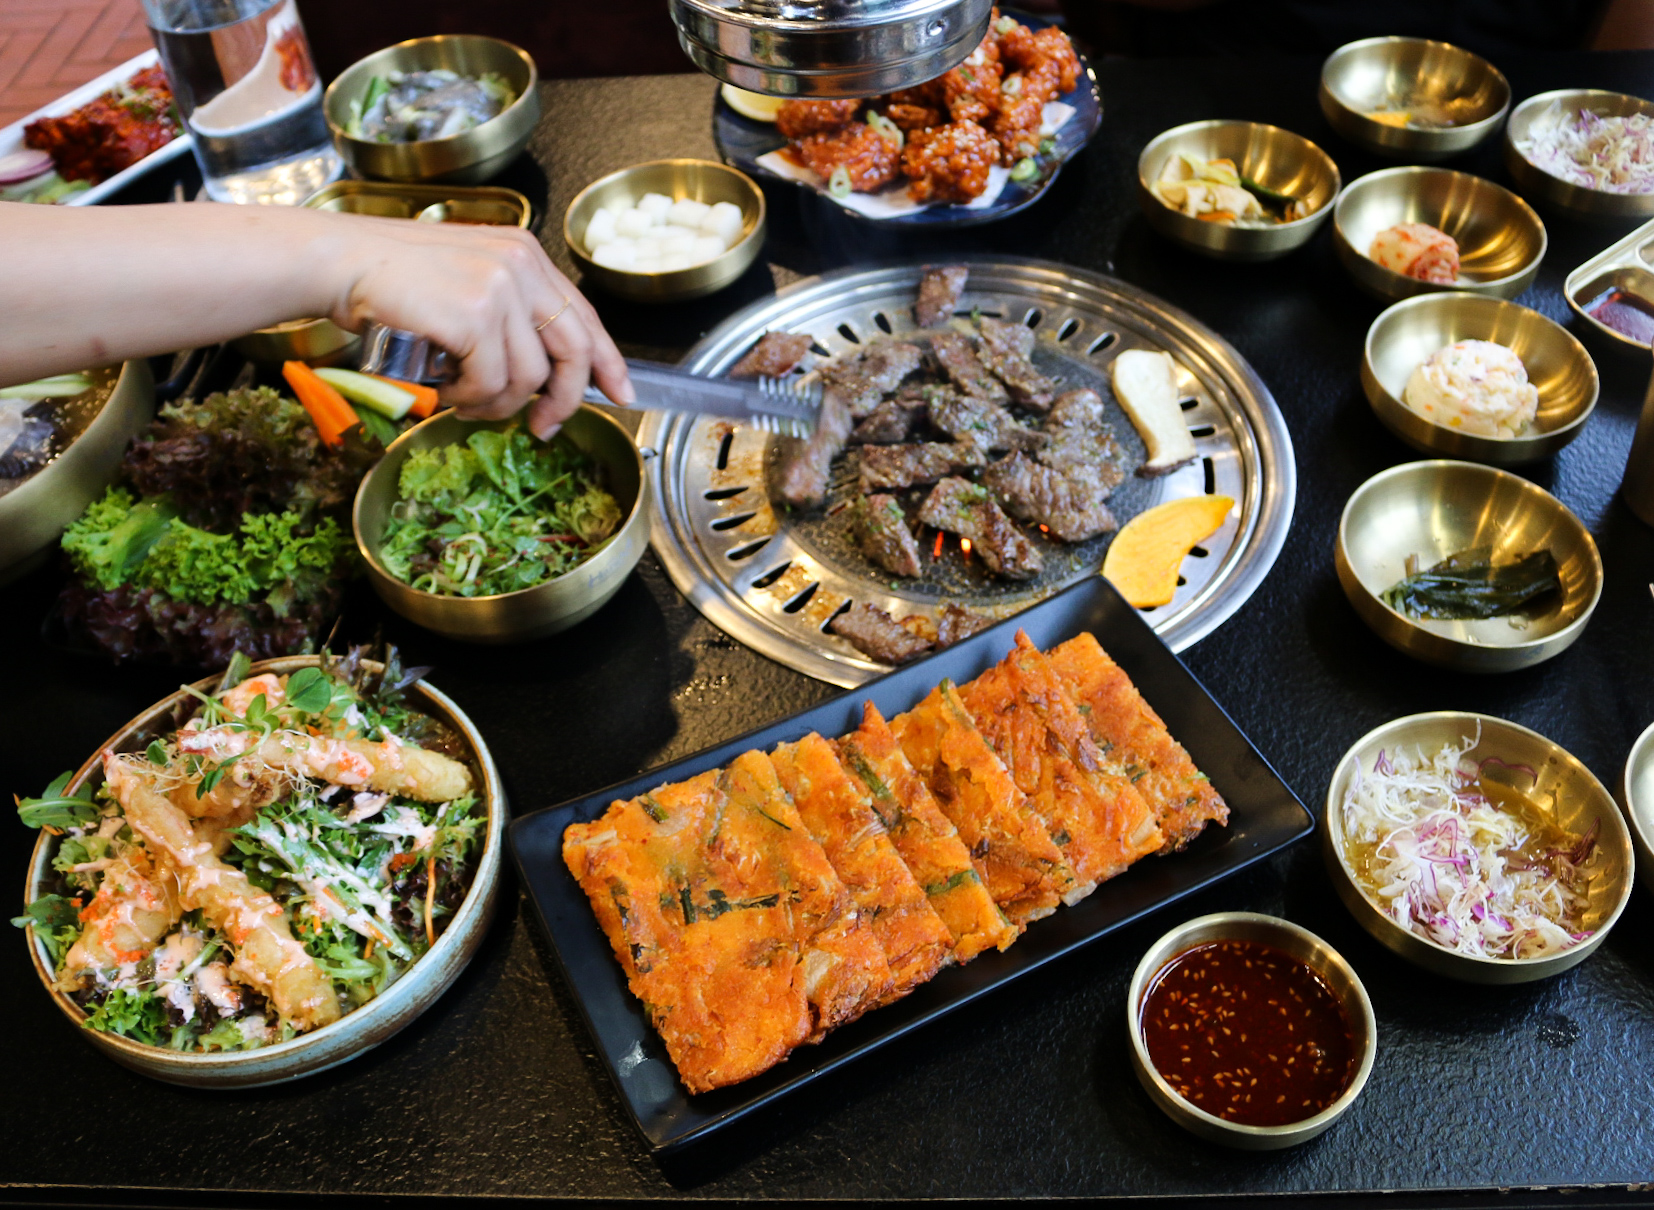 Hot in the City: Hanok is the newest Korean BBQ restaurant to open in Dickson